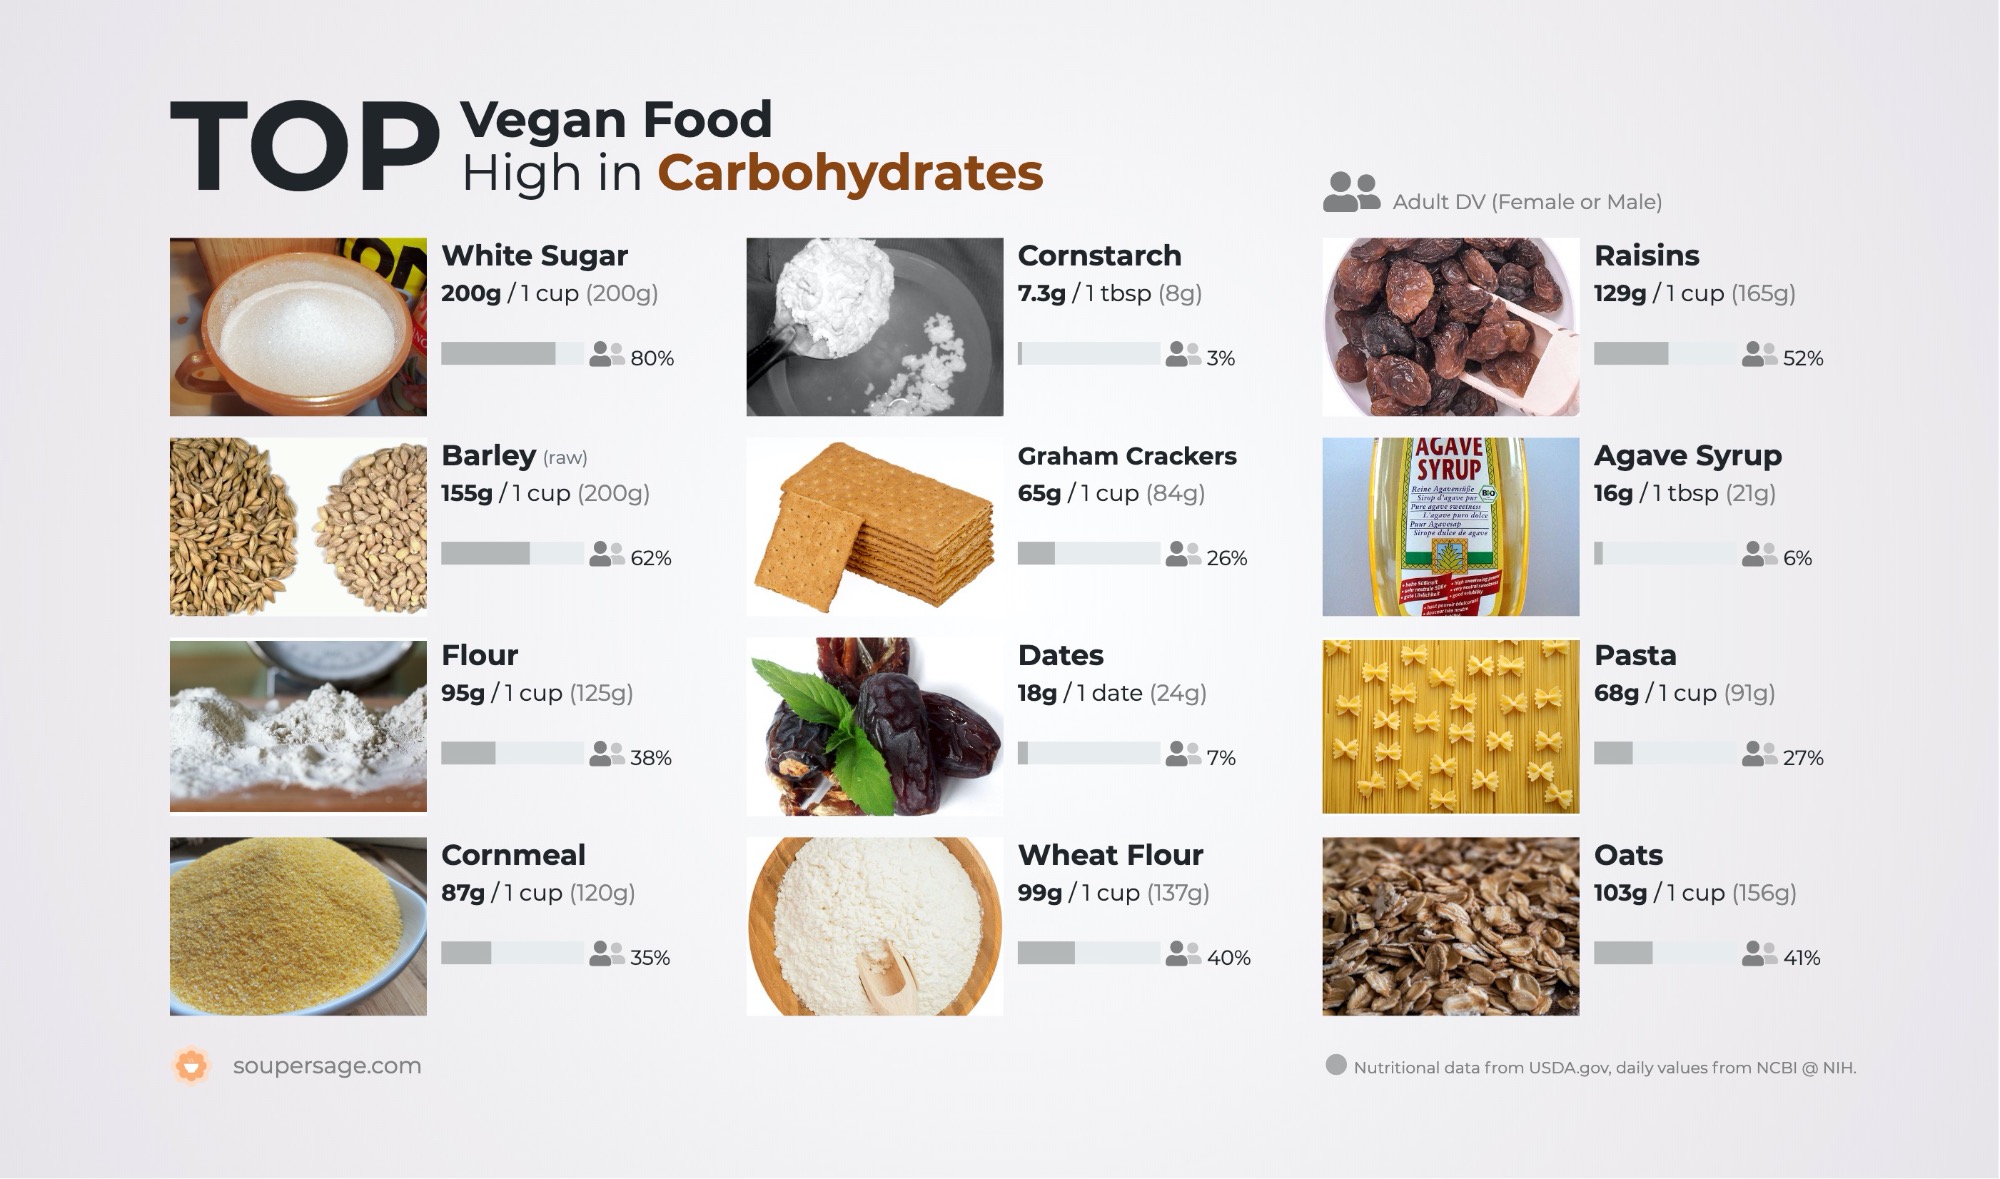 image of Top Vegan Food High in Carbohydrates